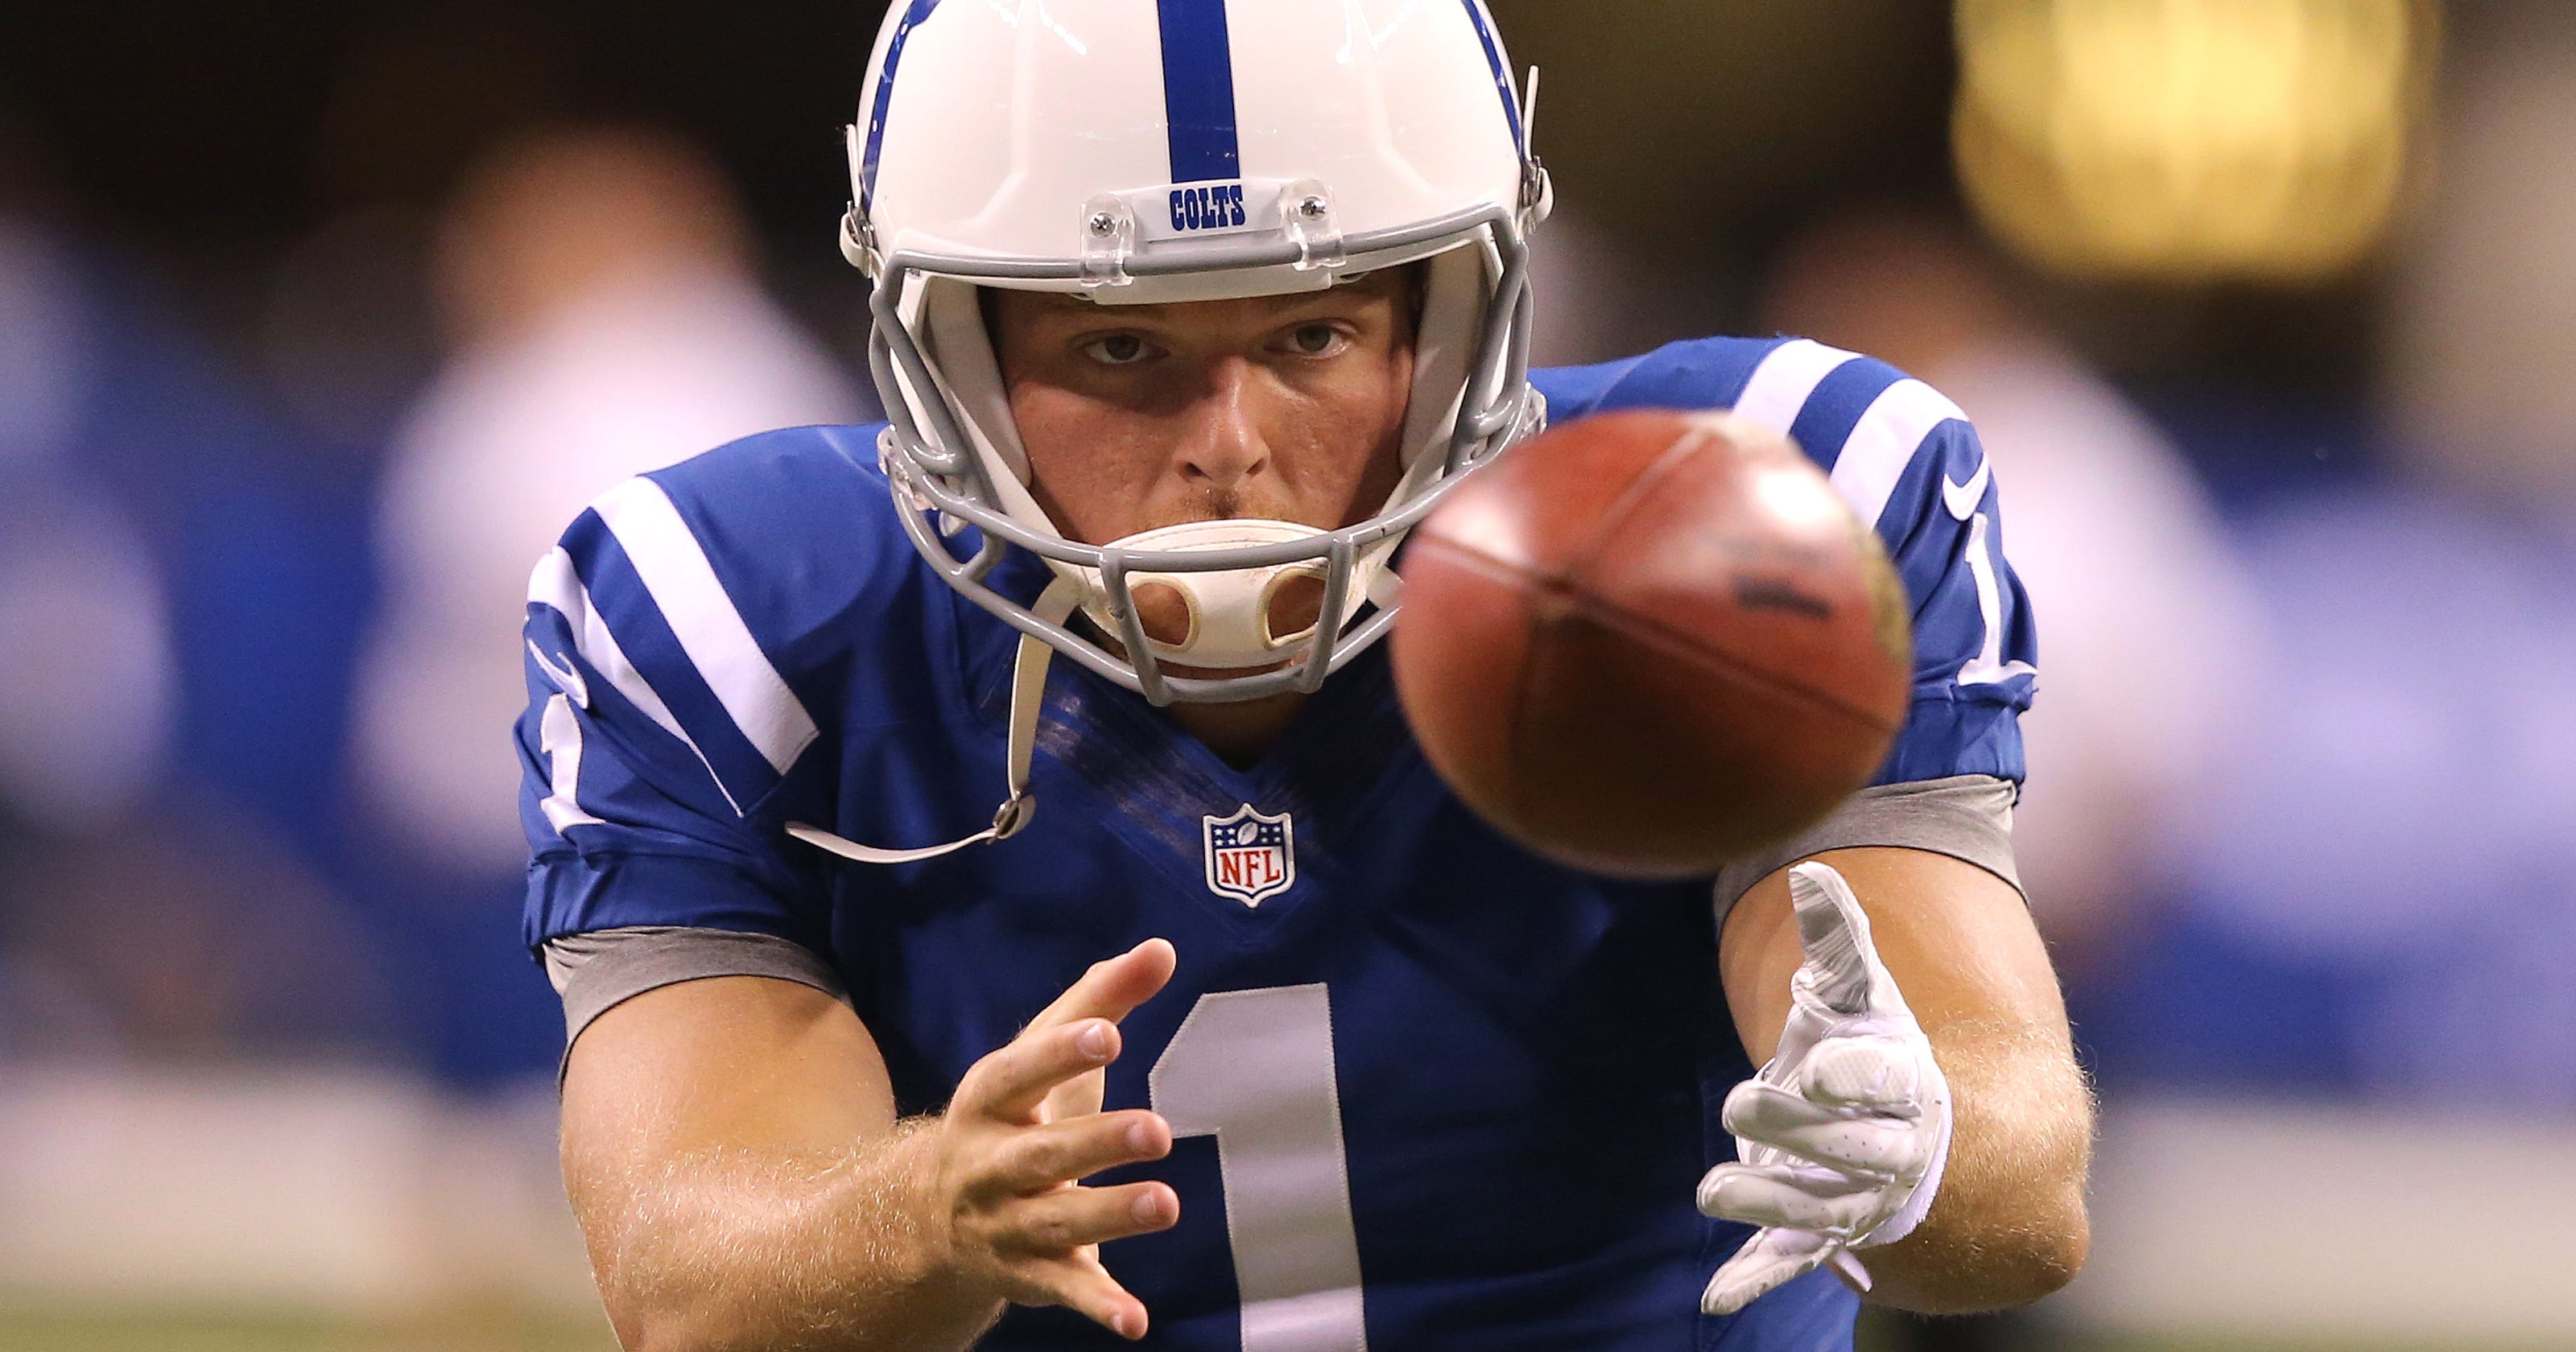 How Colts’ Pat McAfee became an NFL punter